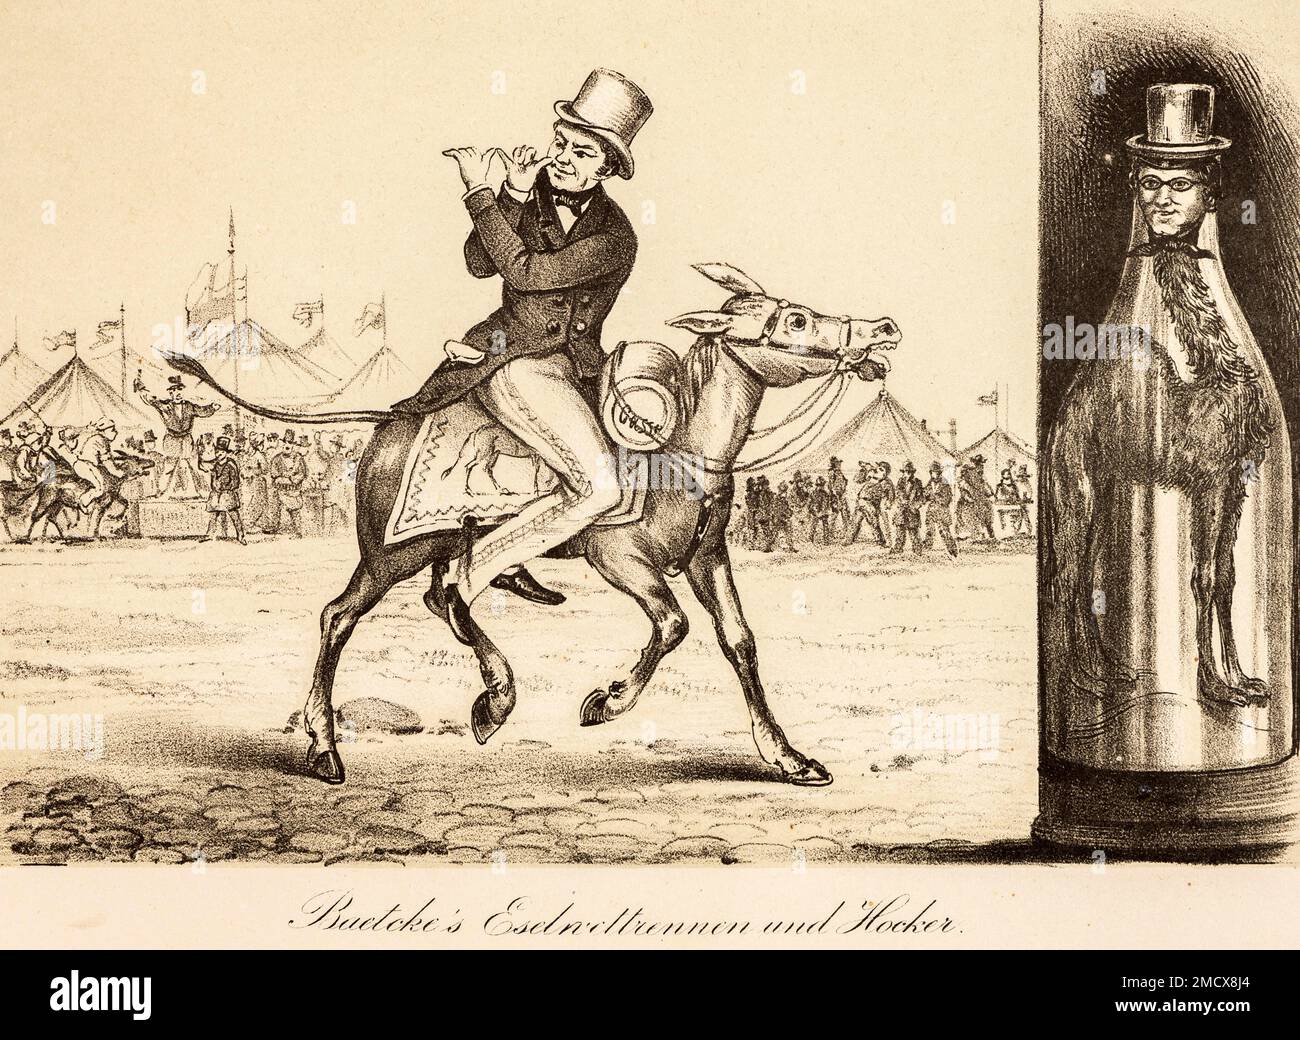 The funny old Hamburg, caricature, joke, Baetcke's donkey race, spectators,  competition, marquees, crowd, running, festive clothes, bottle, Germany  Stock Photo - Alamy